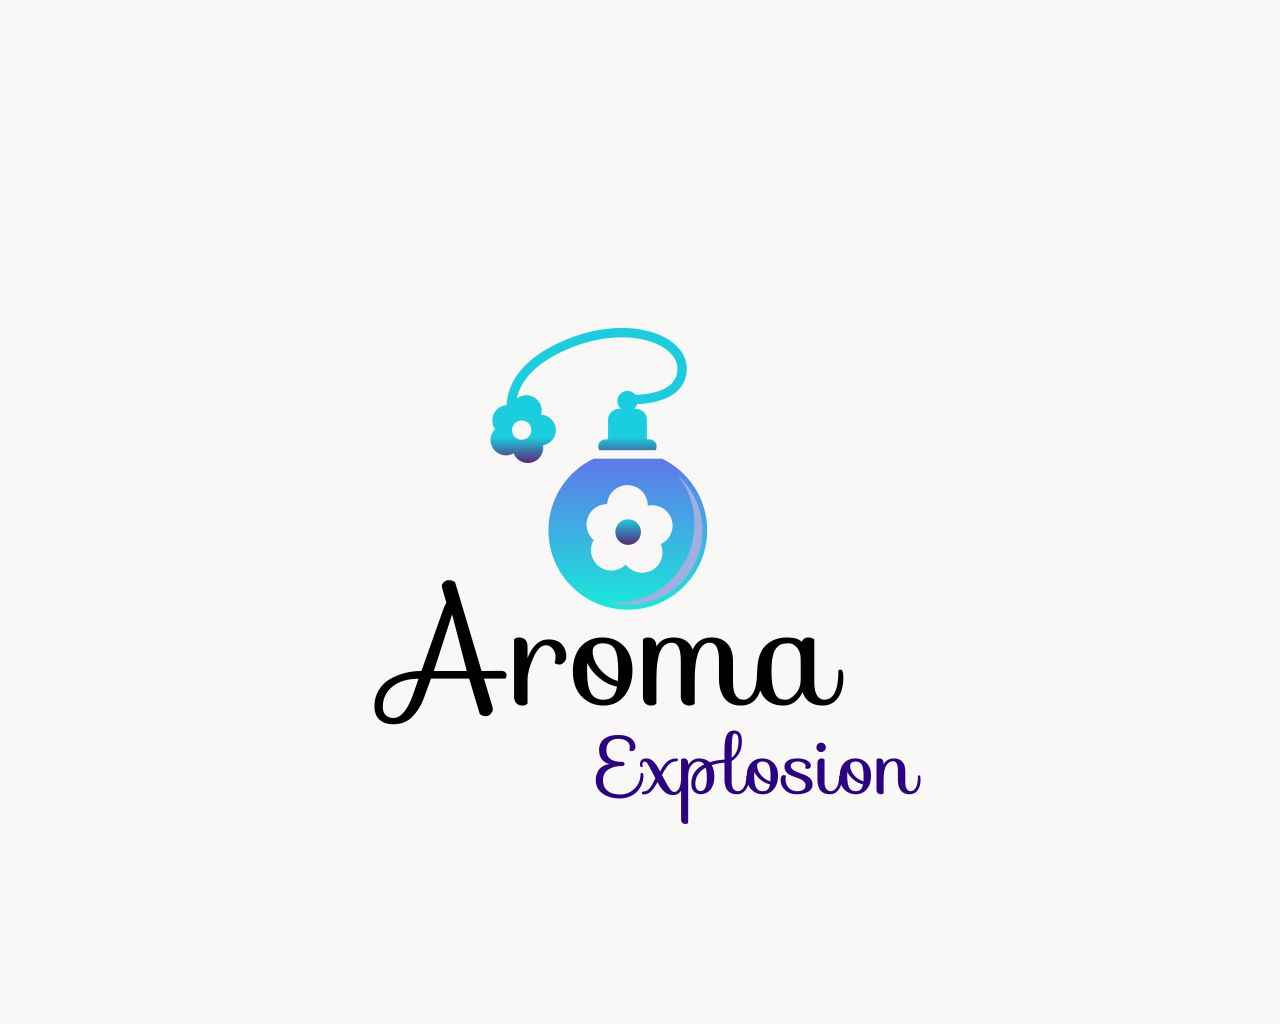 This shop is called AromaExplosion 